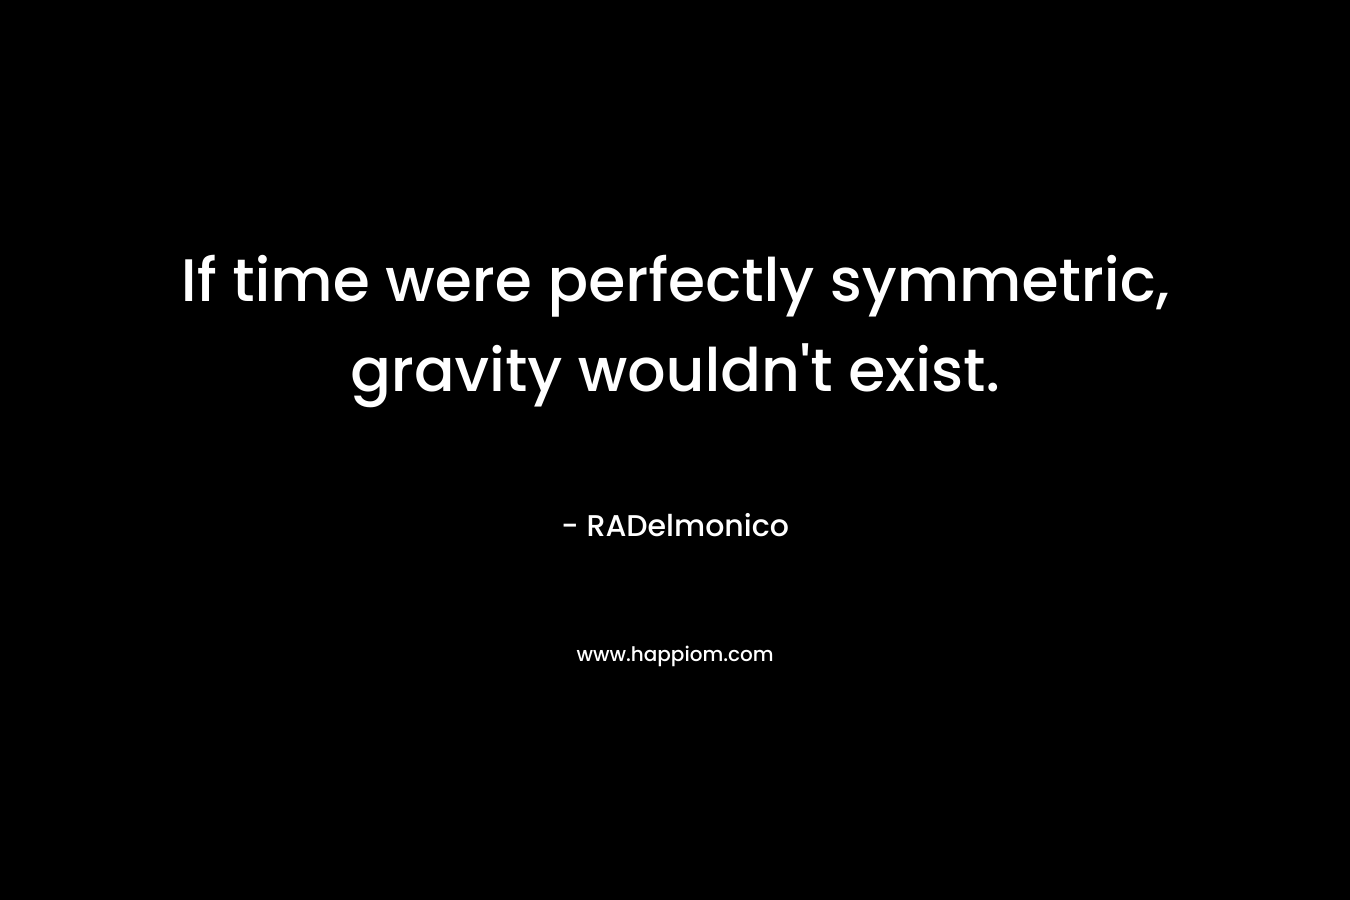 If time were perfectly symmetric, gravity wouldn't exist.